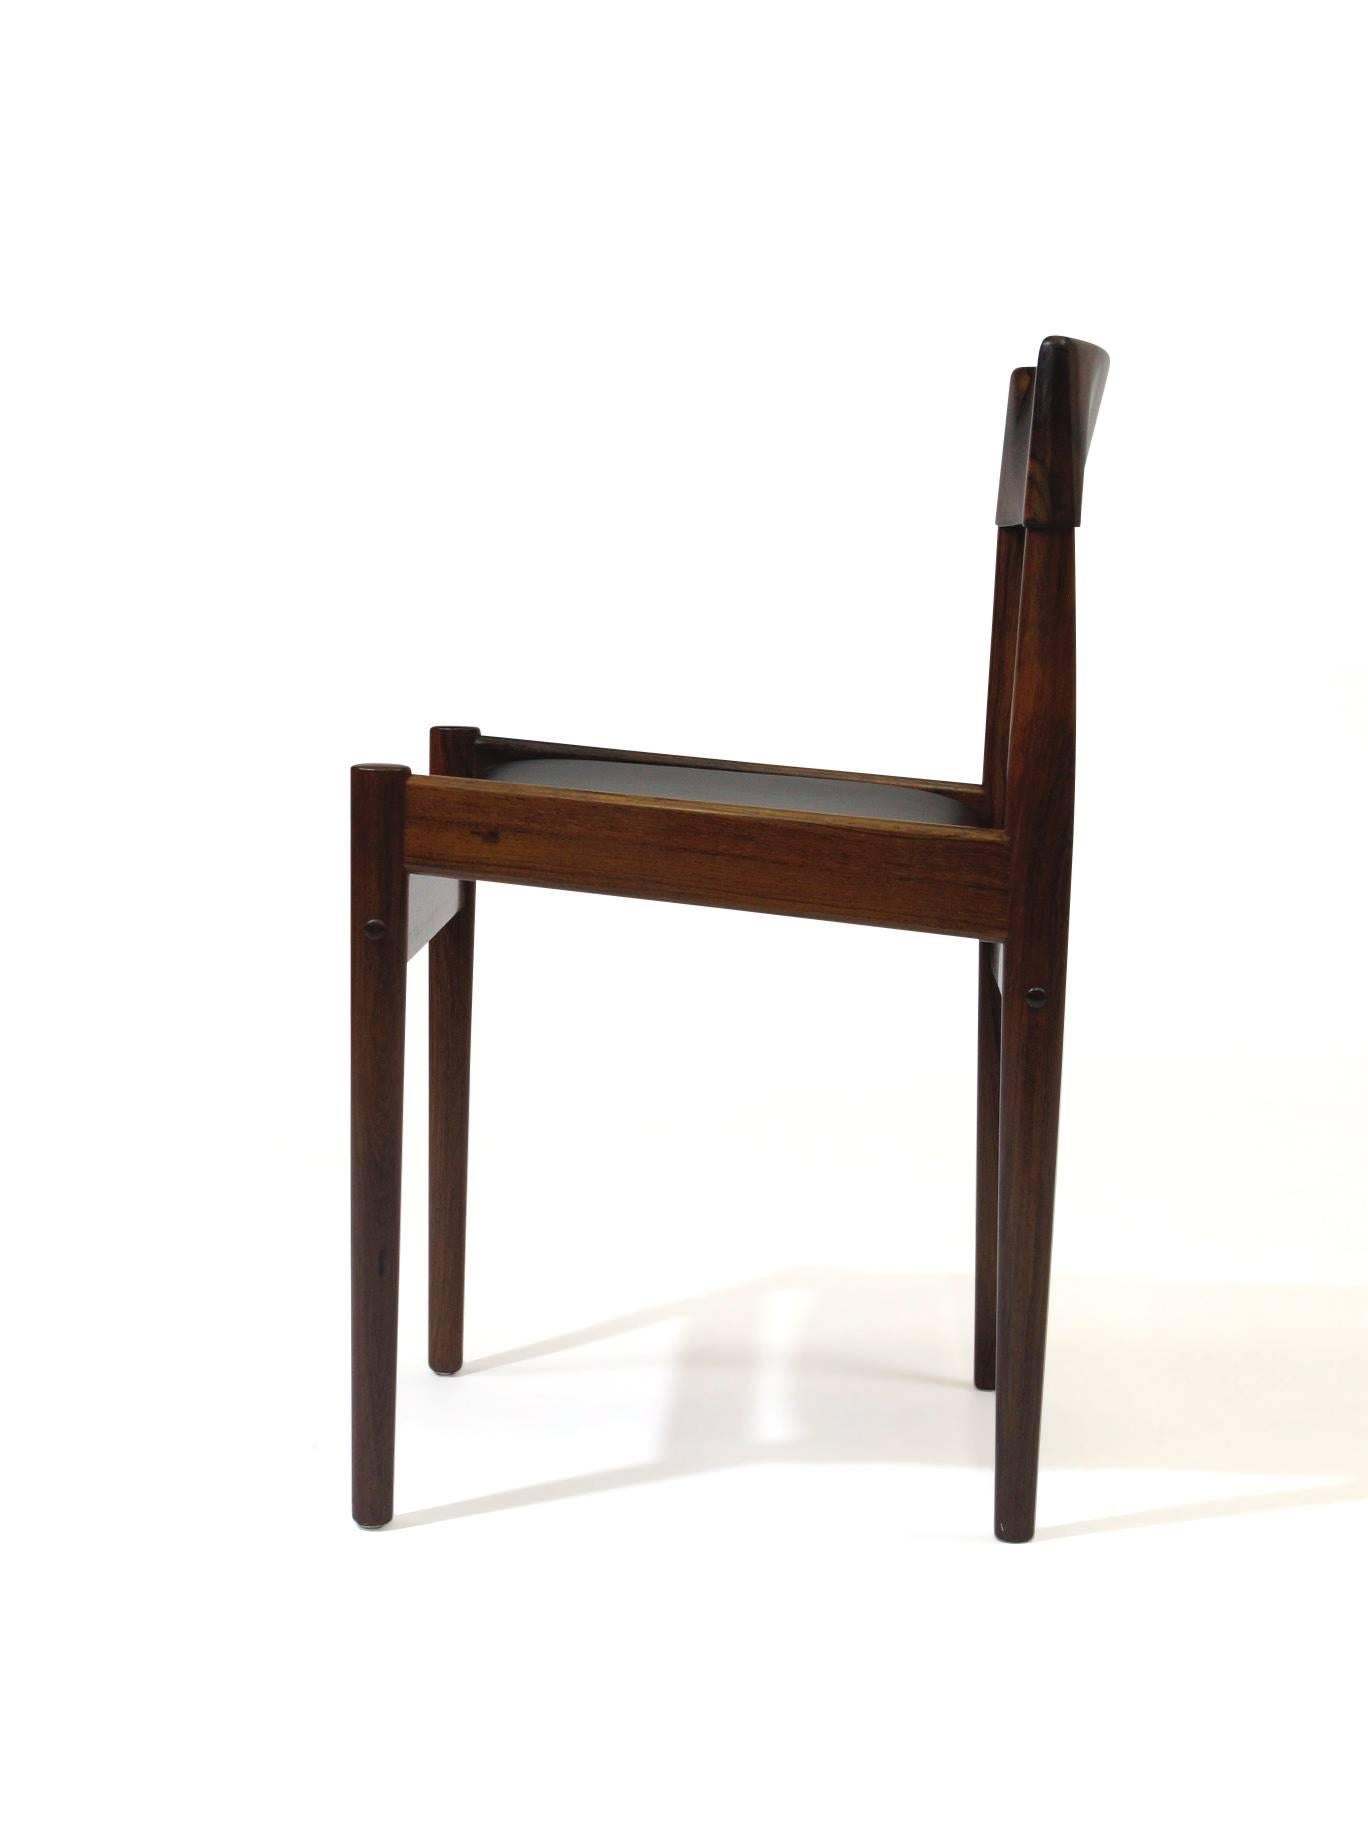 Leather 10 Grete Jalk for P. Jeppesens Mid-century Danish Rosewood Danish Dining Chairs